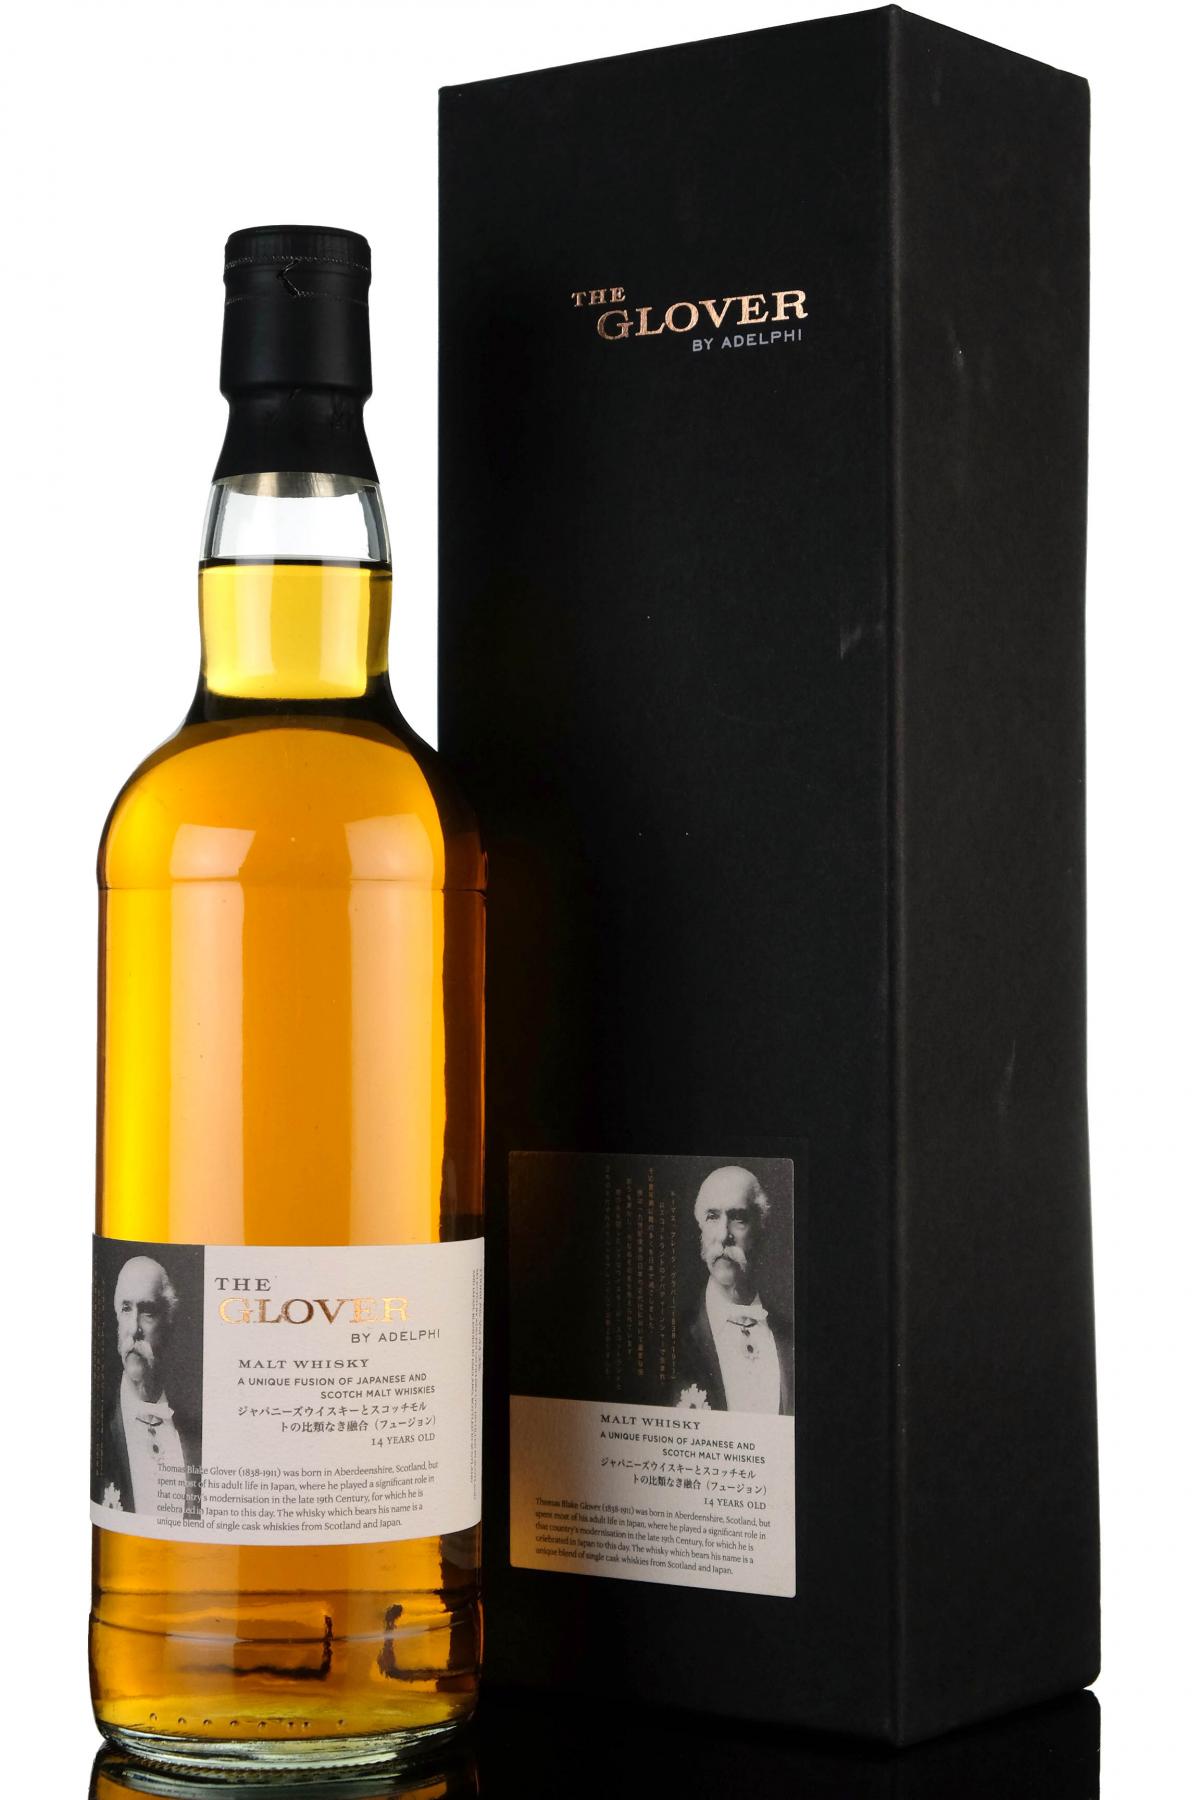 The Glover 14 Year Old - Adelphi